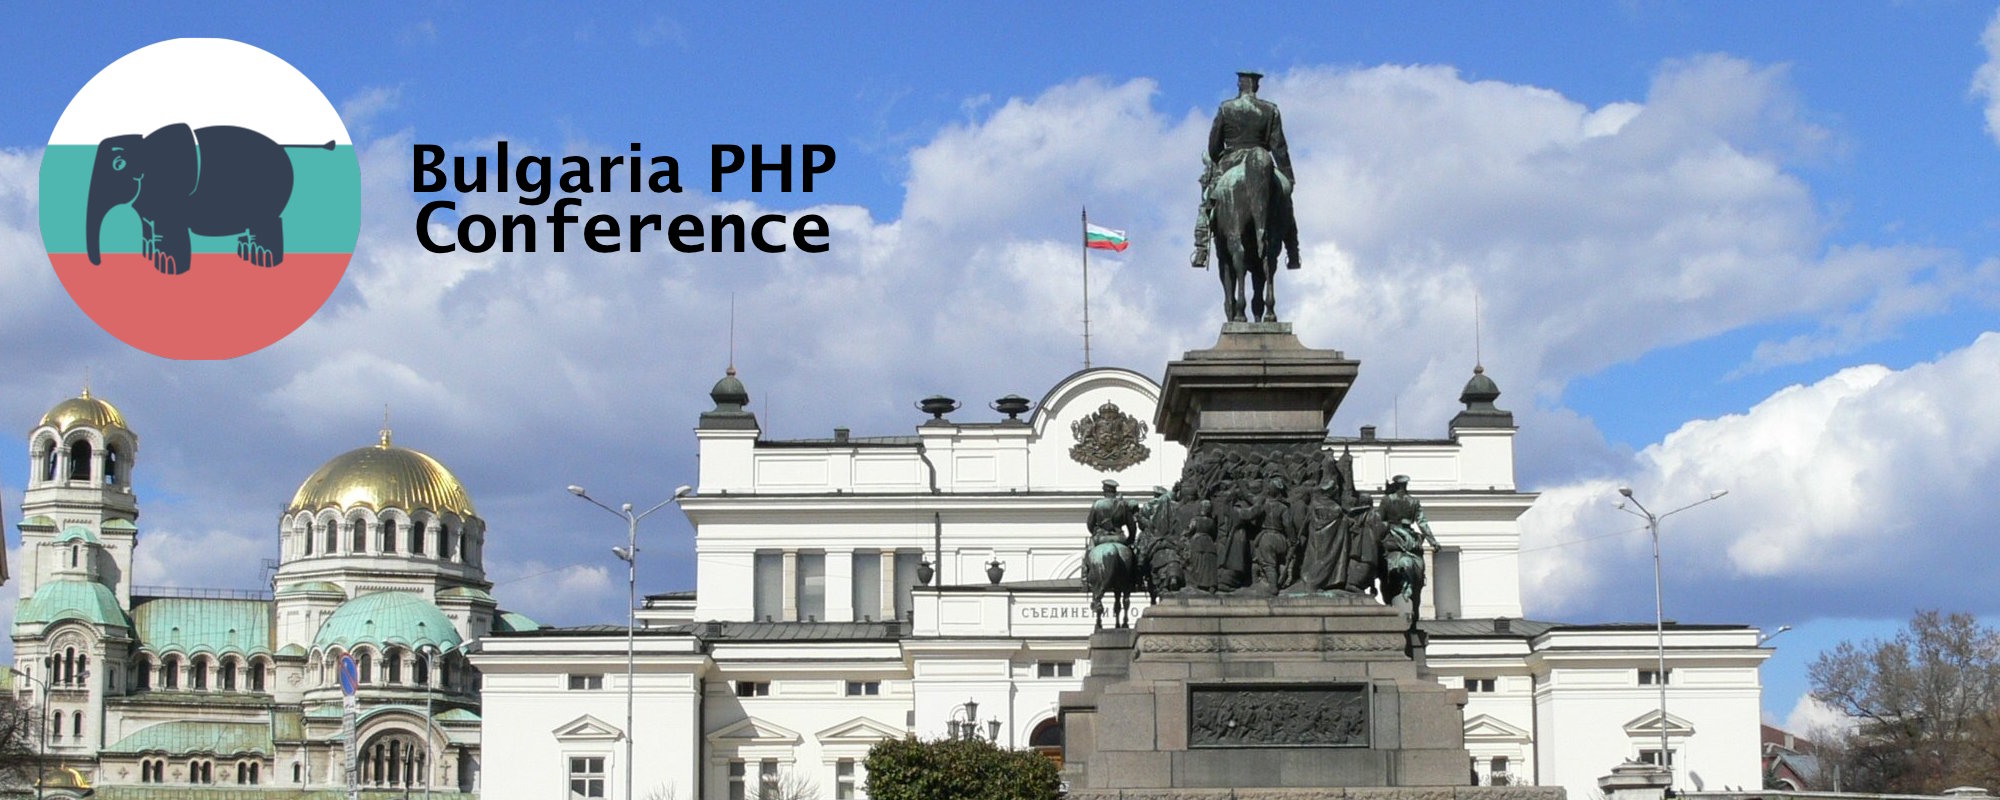 Automate WP upgrades at Bulgaria PHP Conference